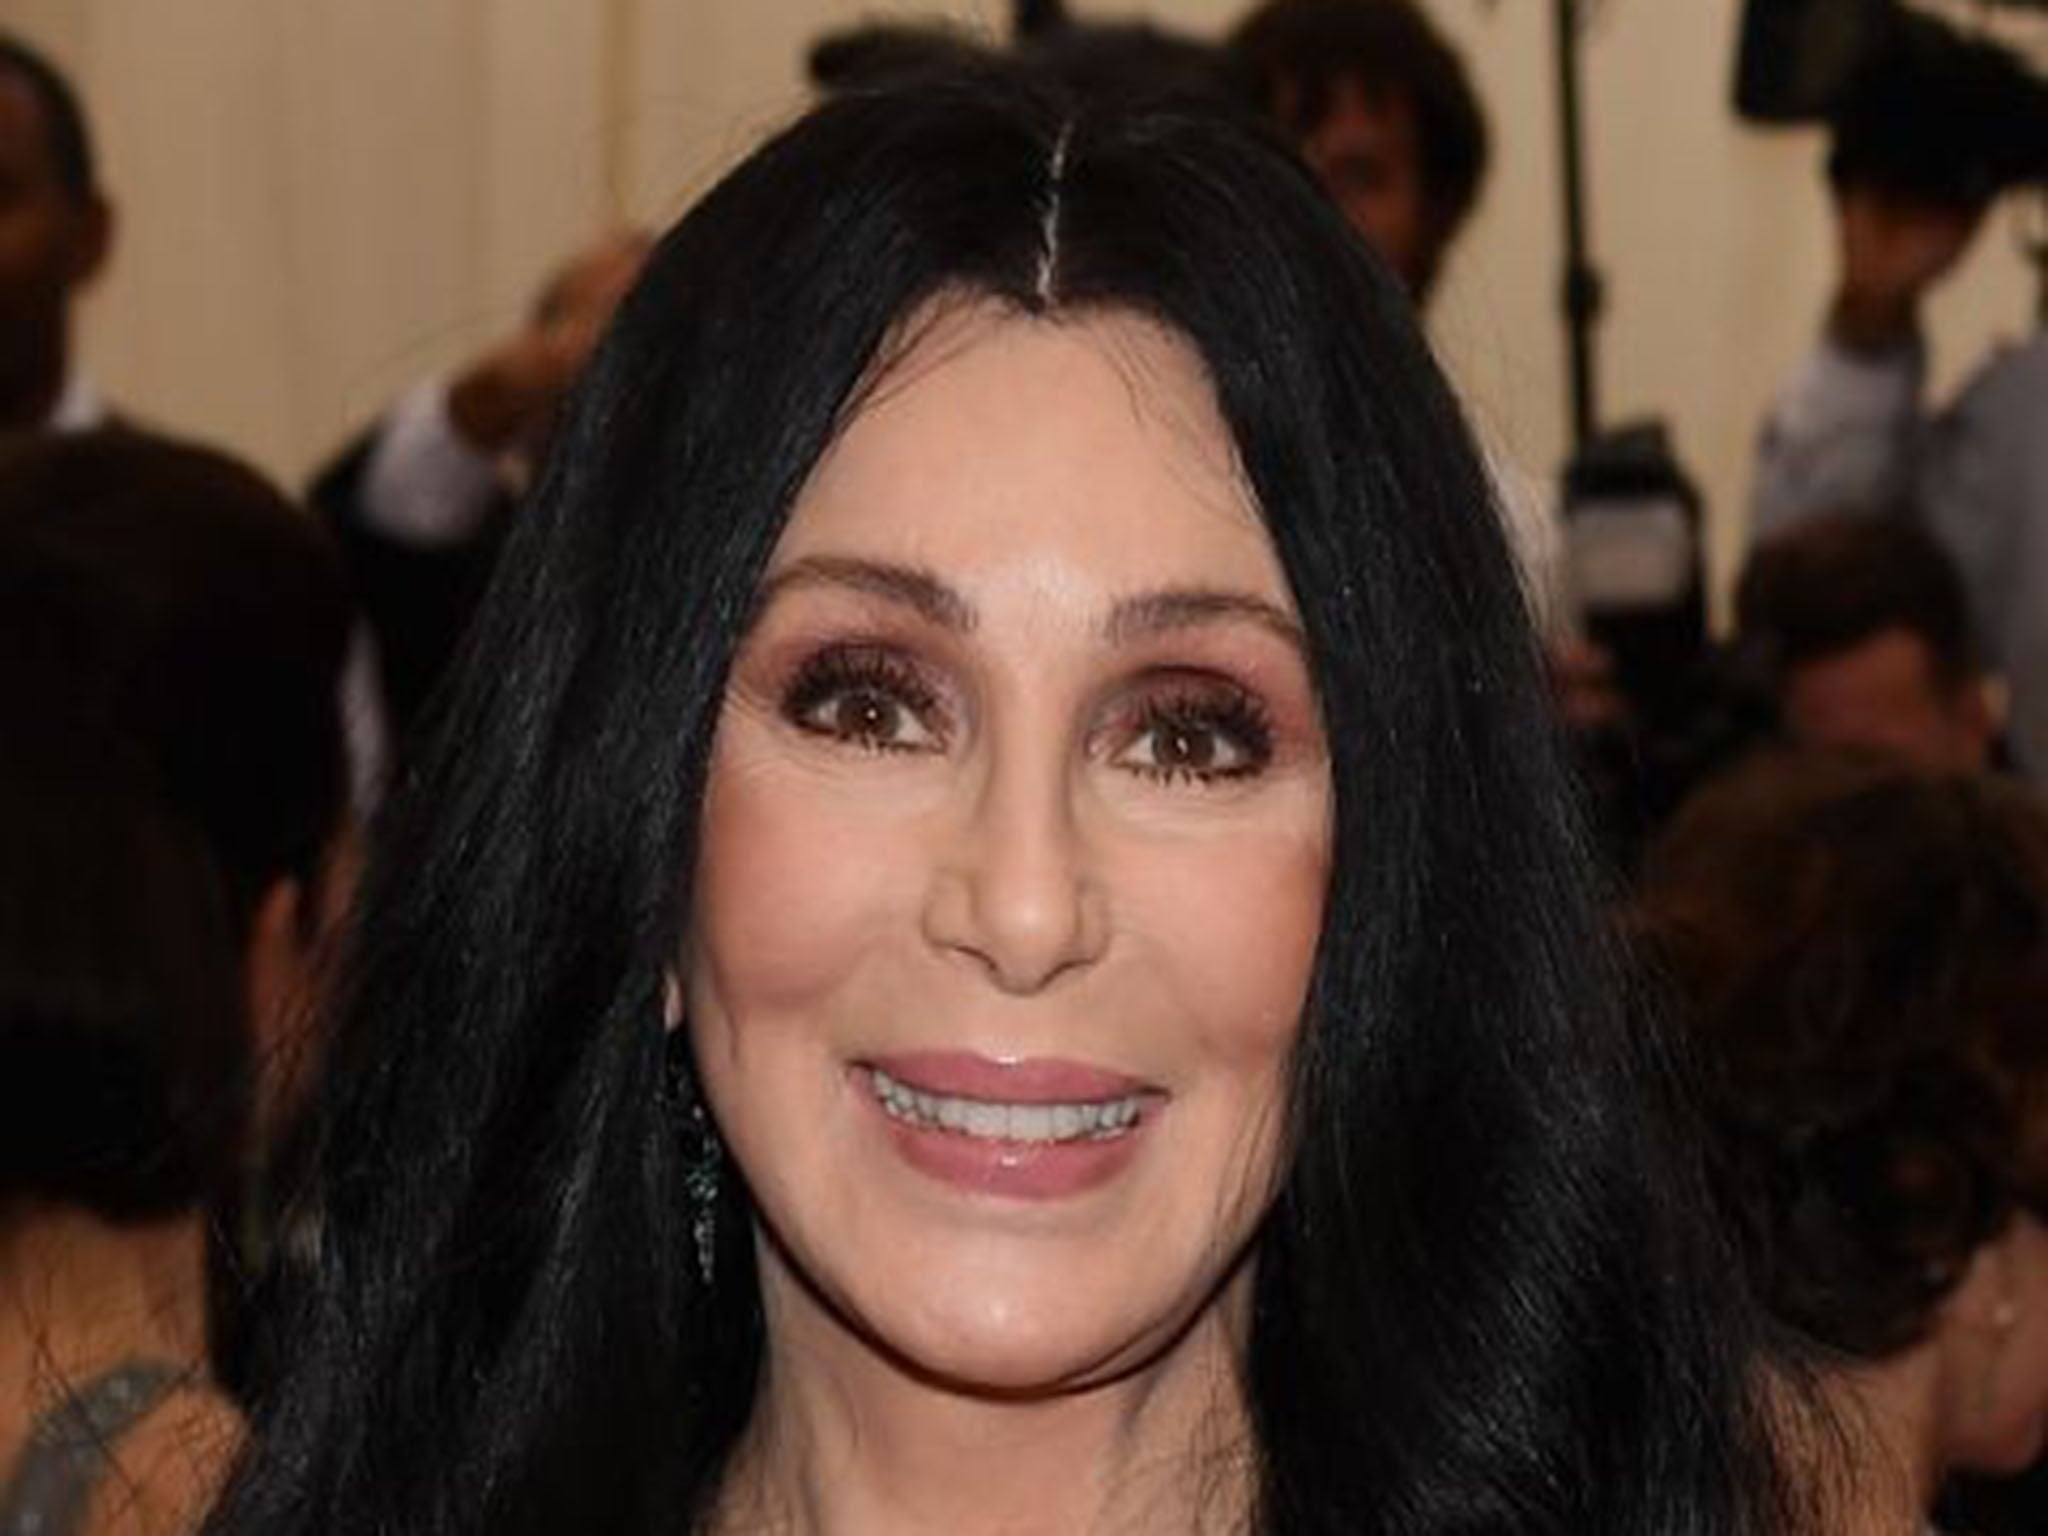 Cher called the water crisis 'a tragedy of staggering proportion'